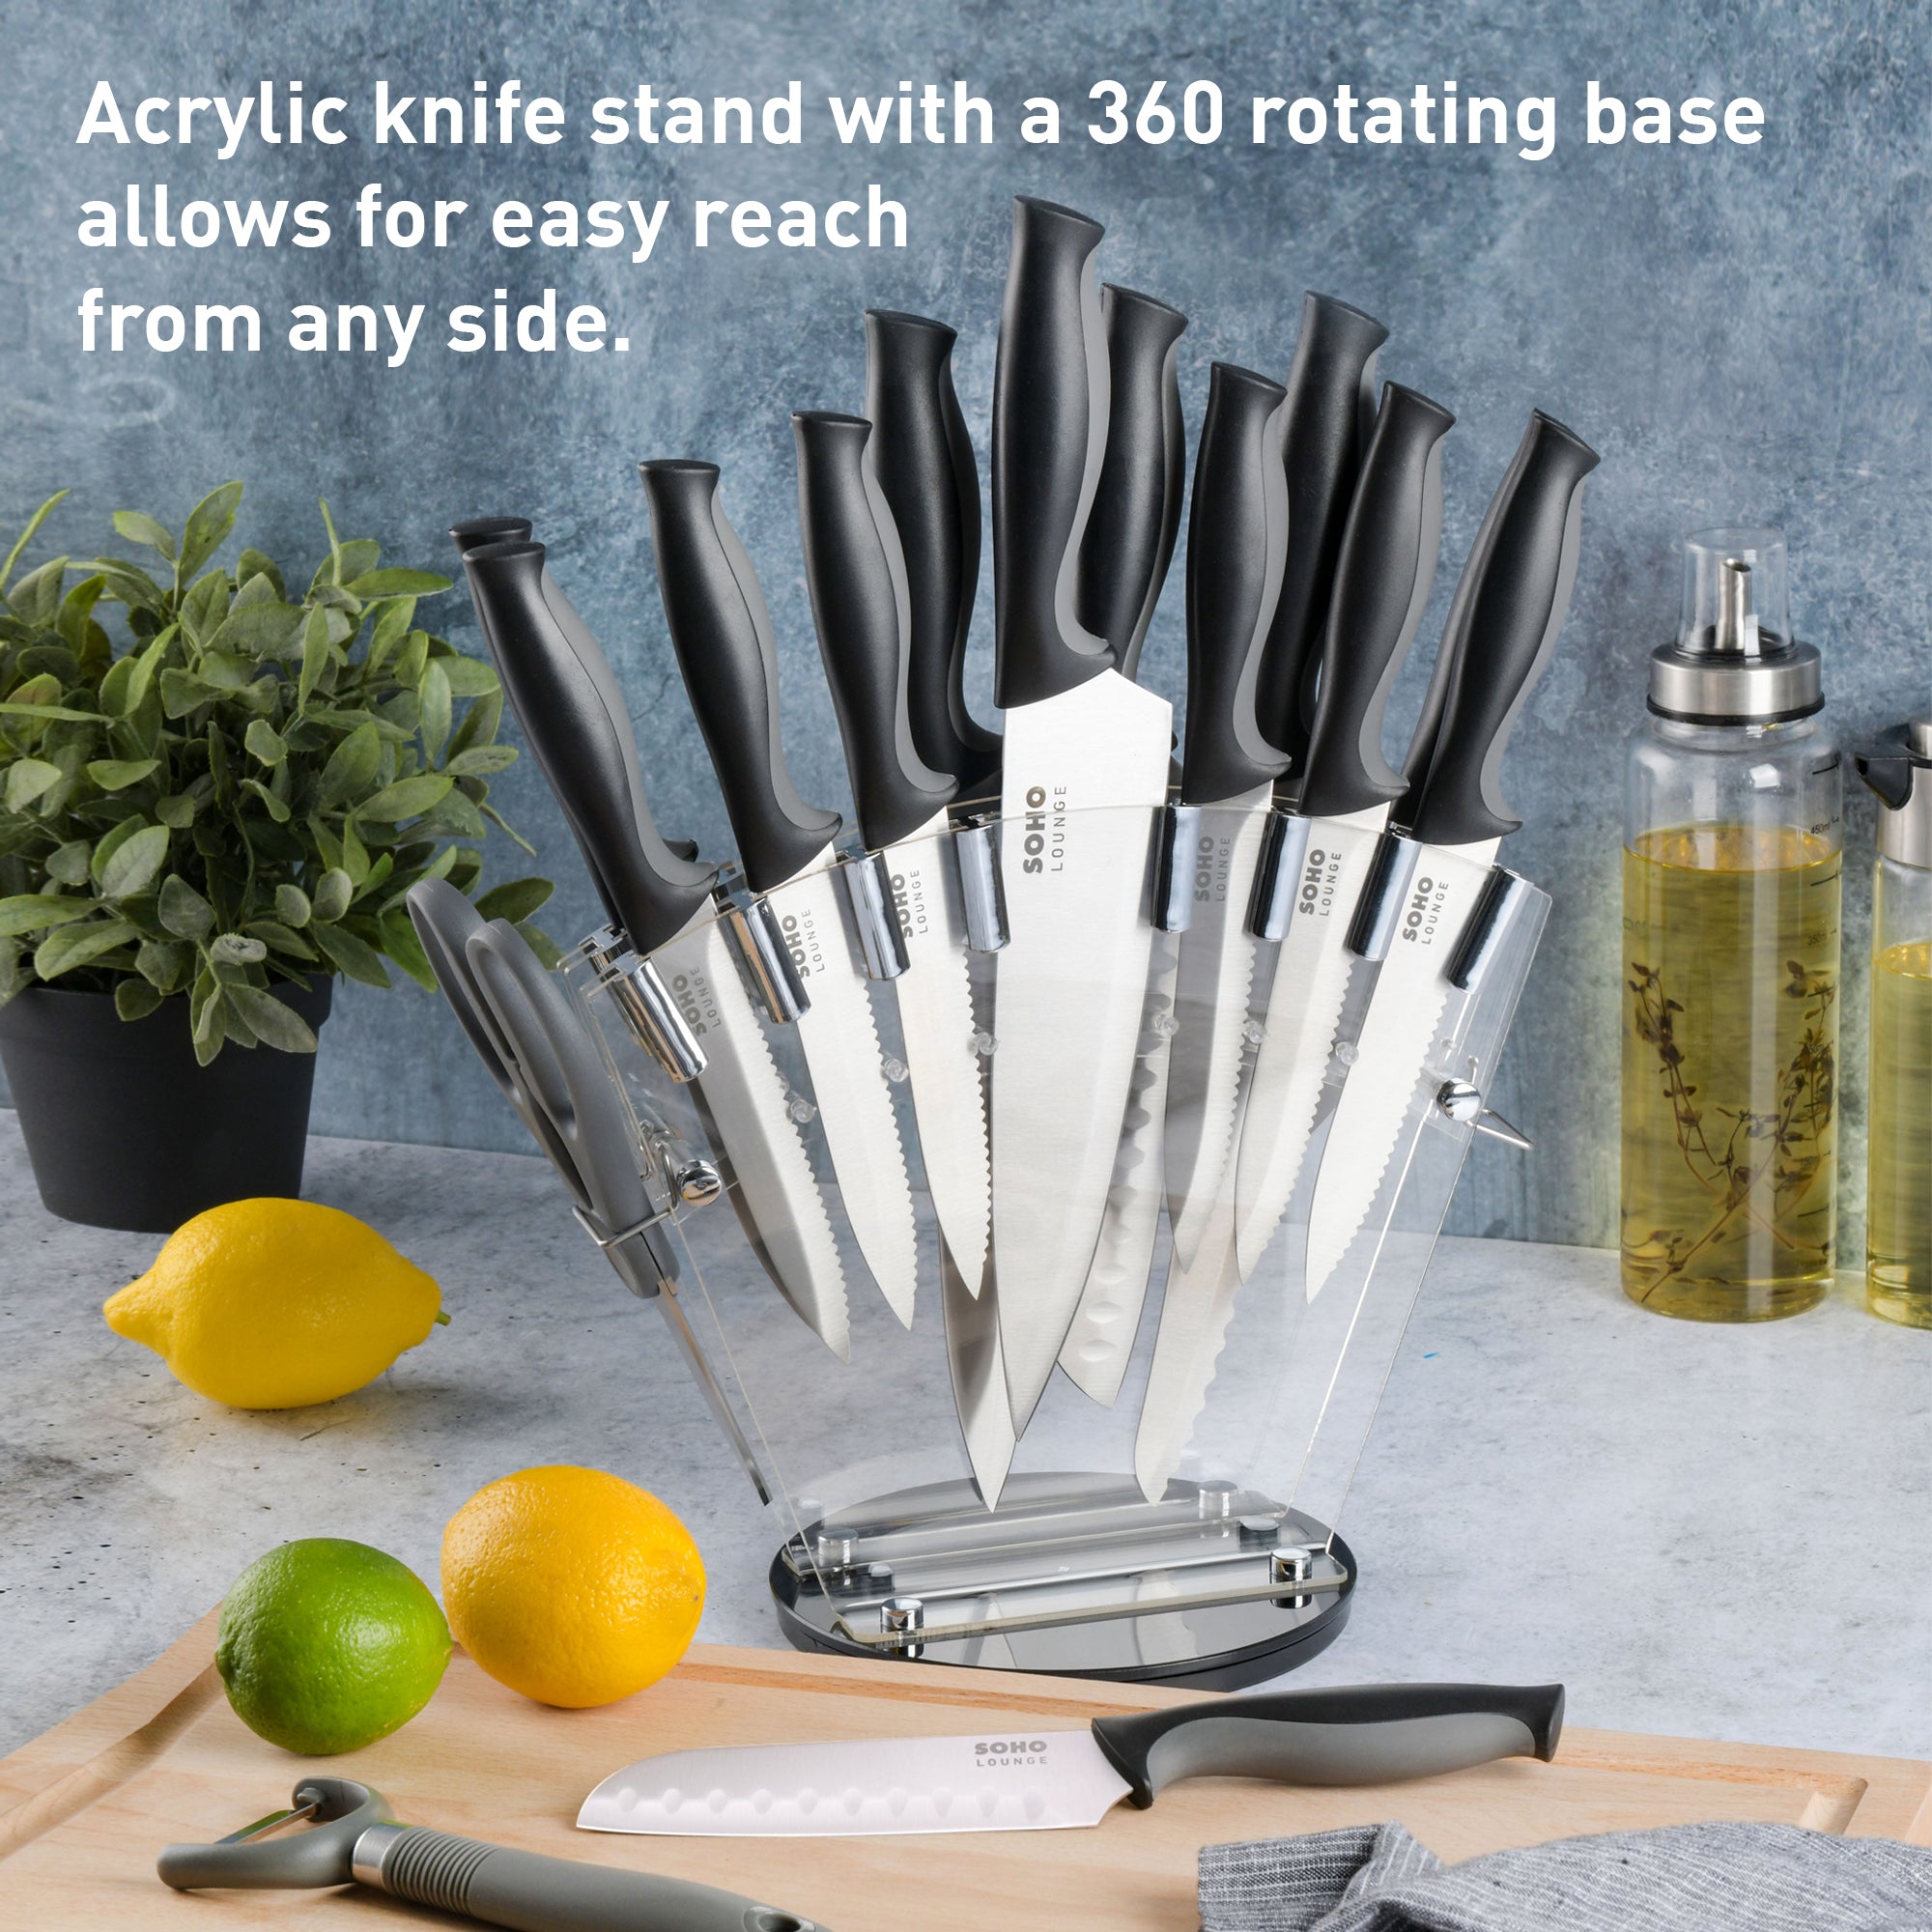 Gibson Soho Lounge 16-Piece Stainless Steel Kitchen Cutlery Knife Set w/ Acrylic Stand